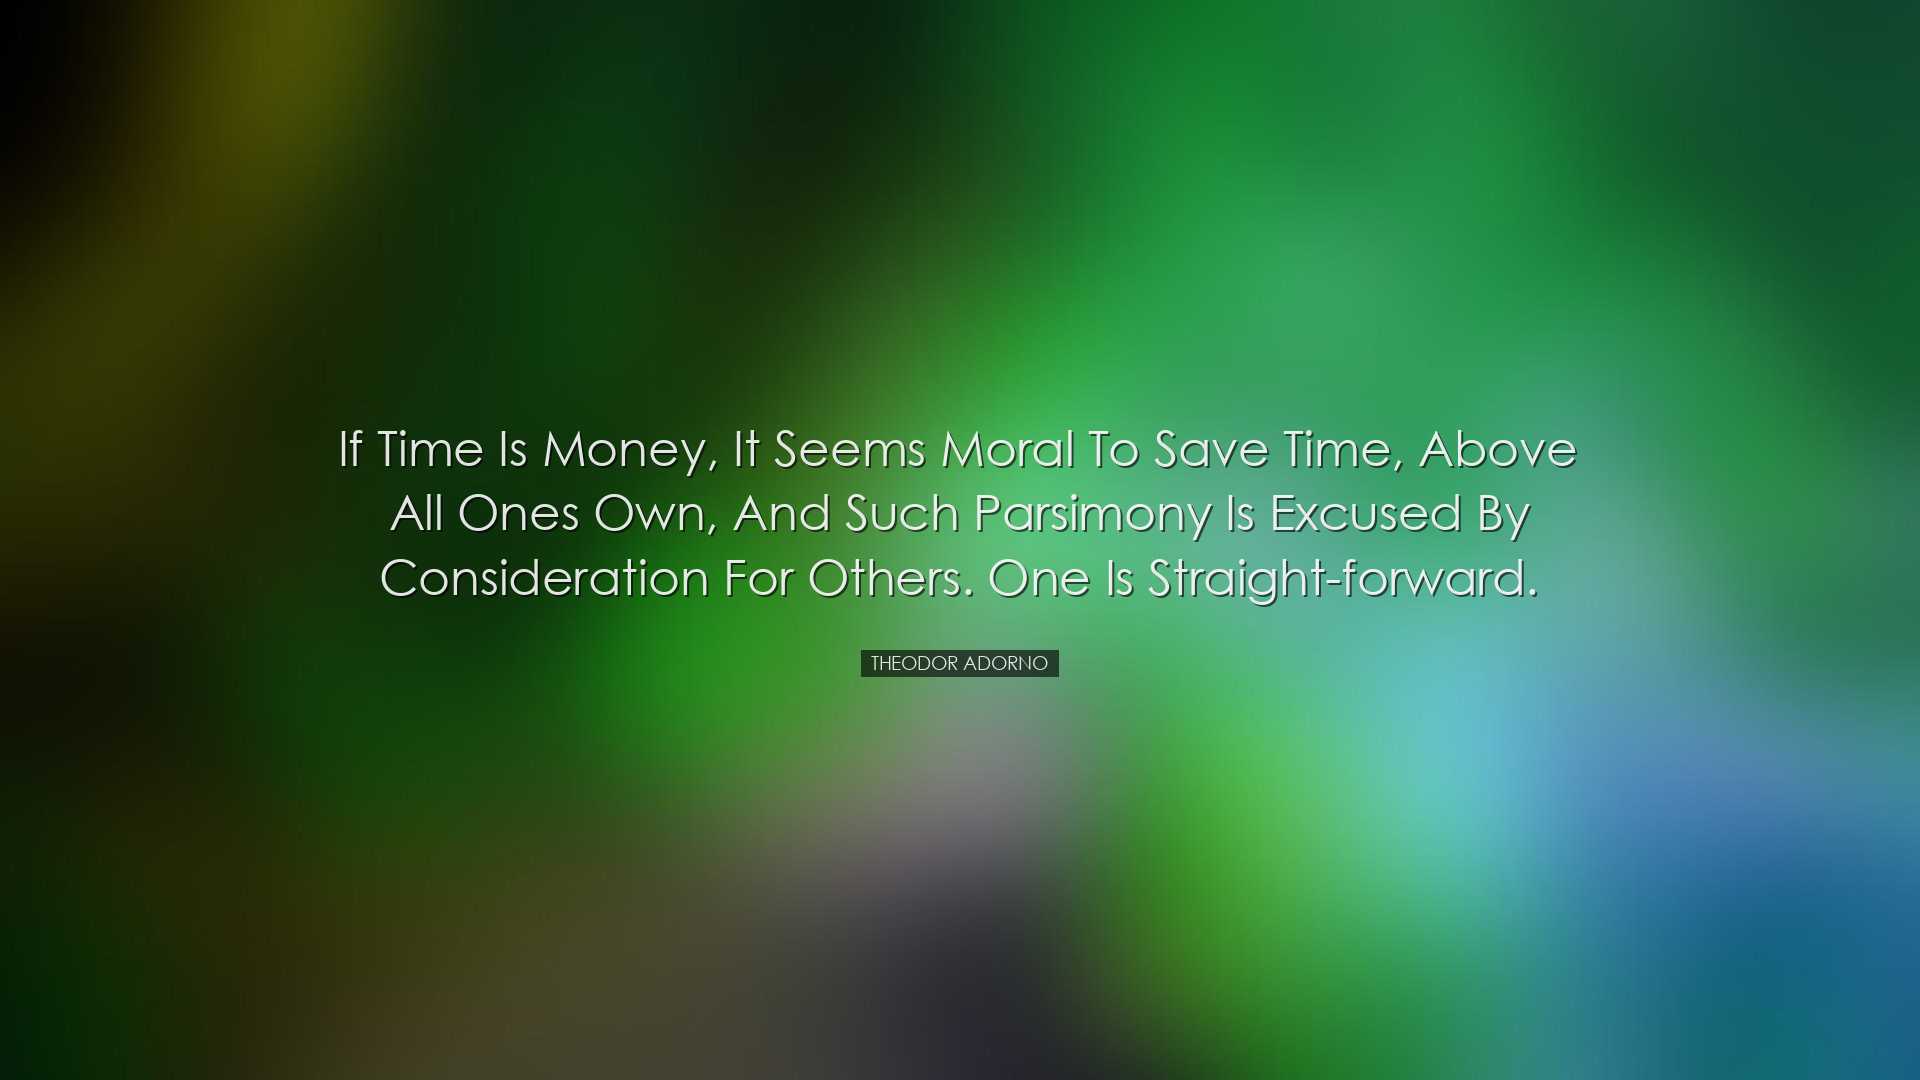 If time is money, it seems moral to save time, above all ones own,